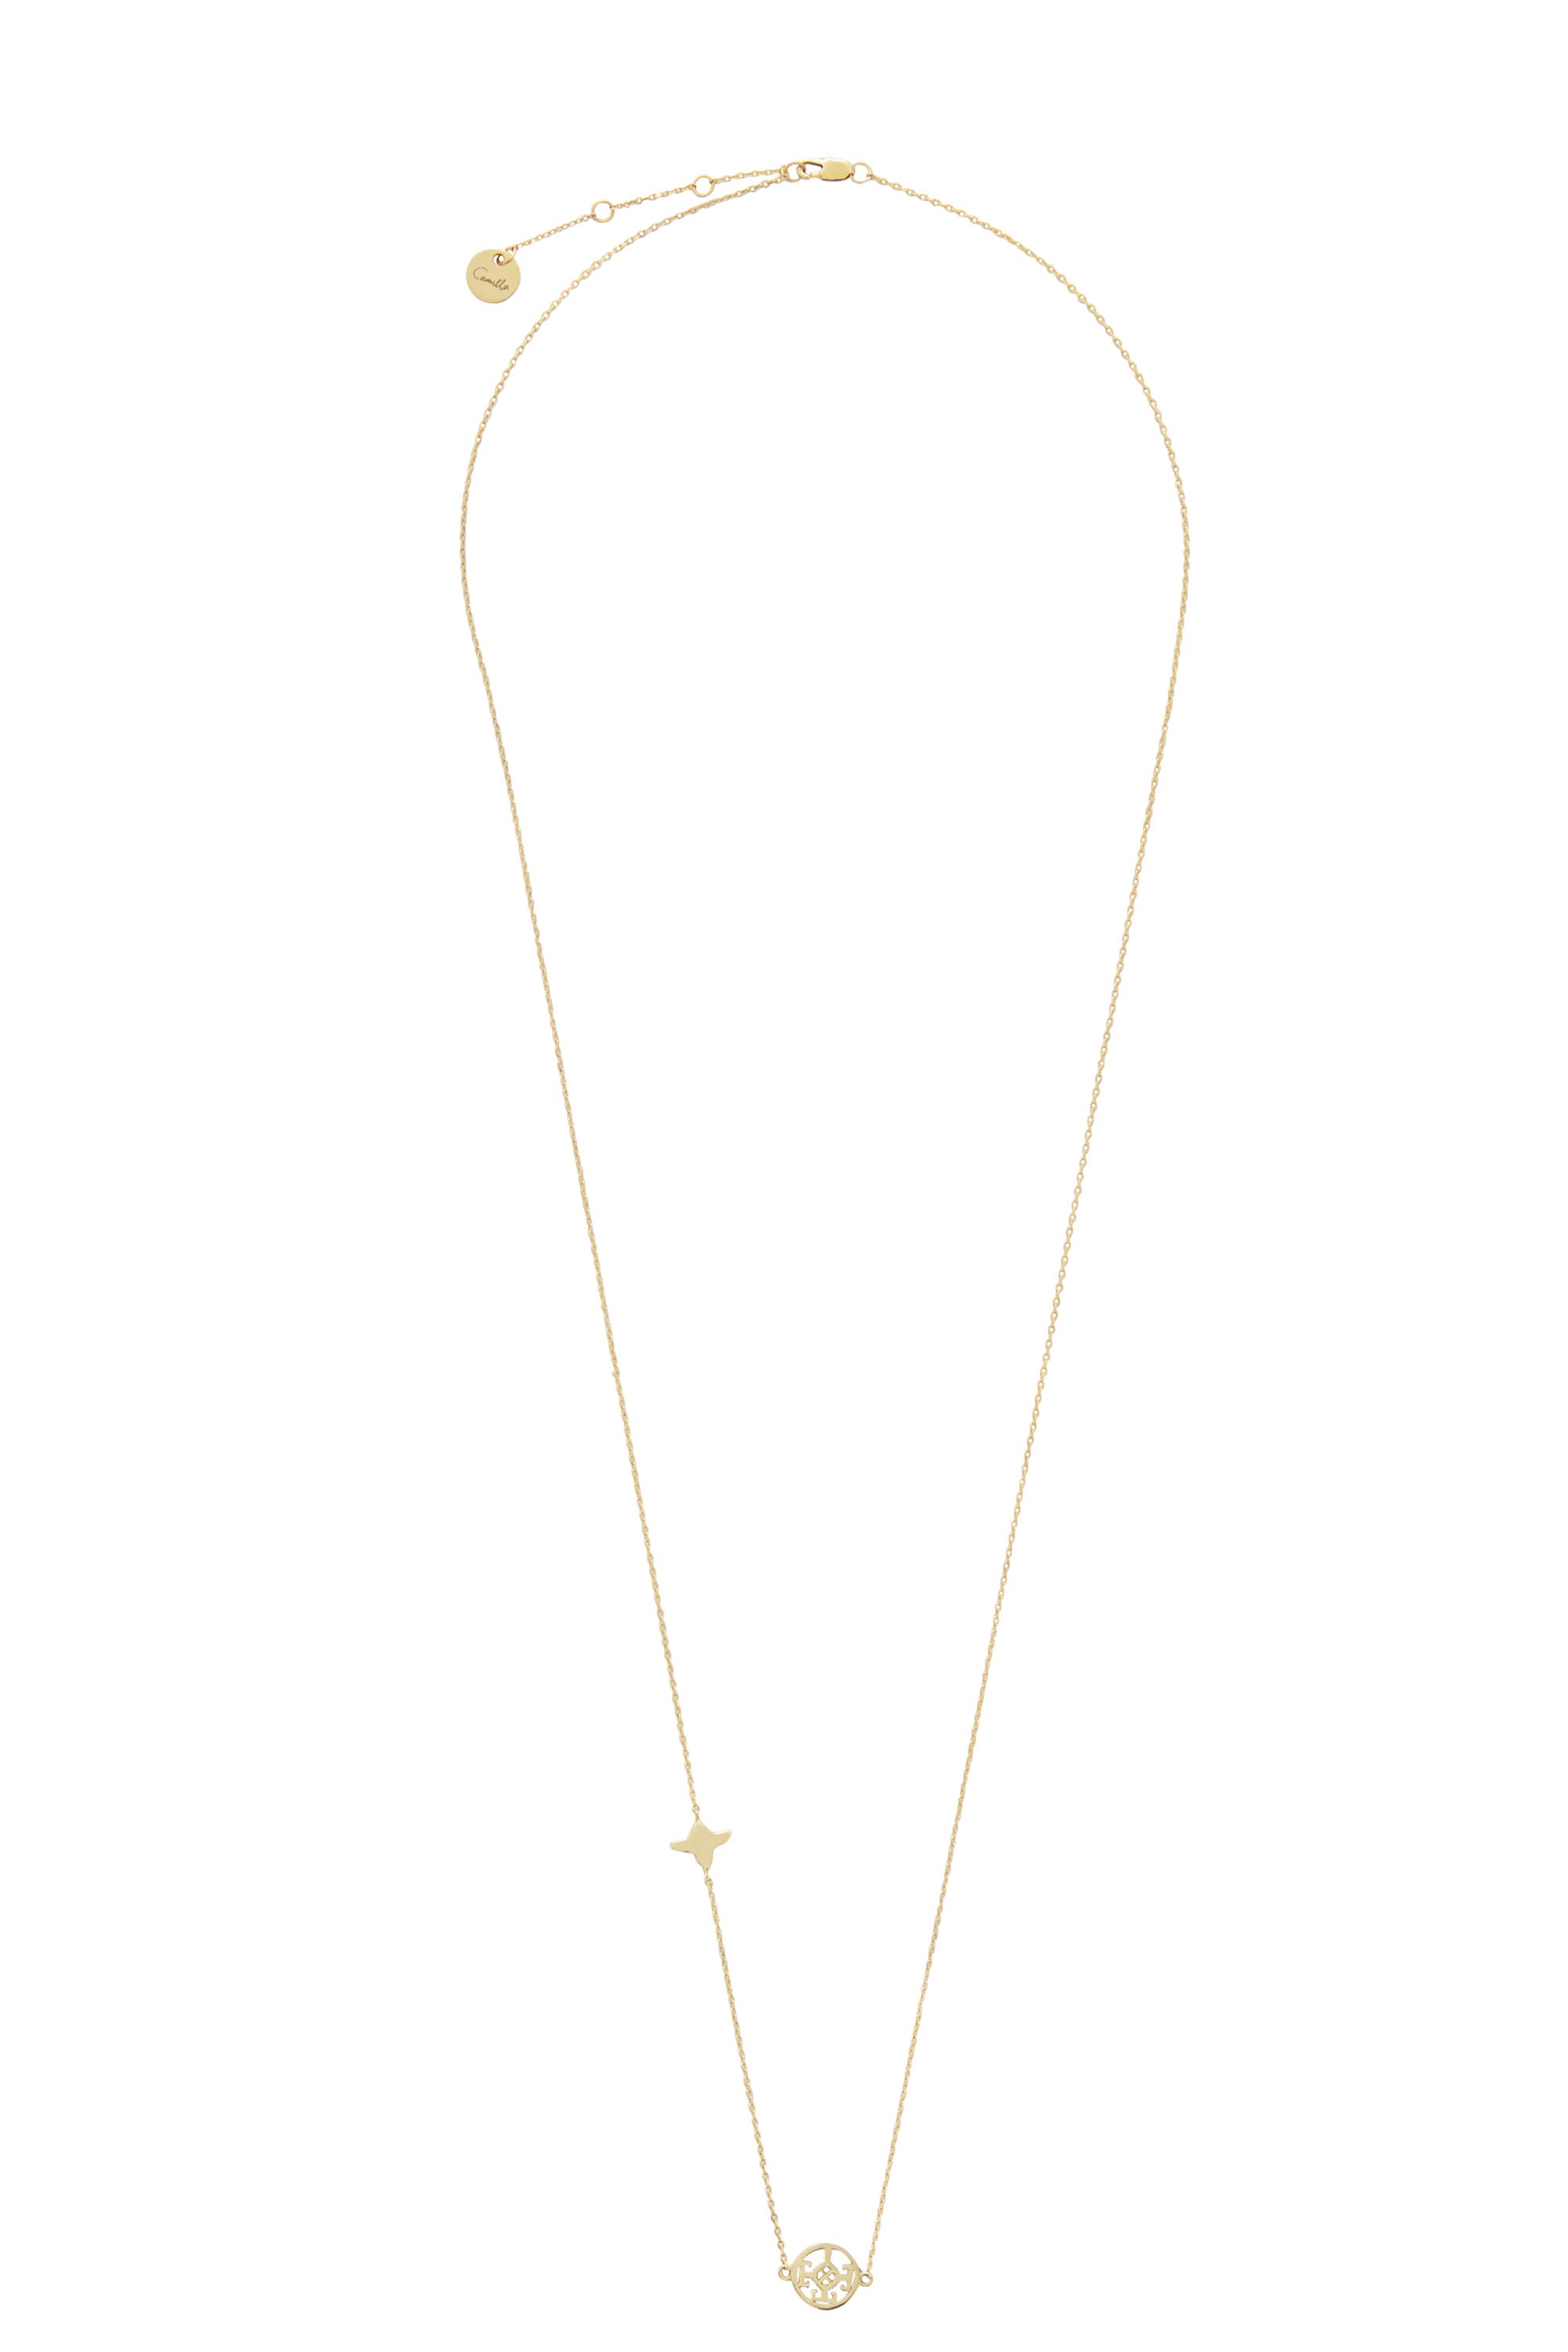 GOLD BRASSS CUT OUT PENDANT NECKLACE